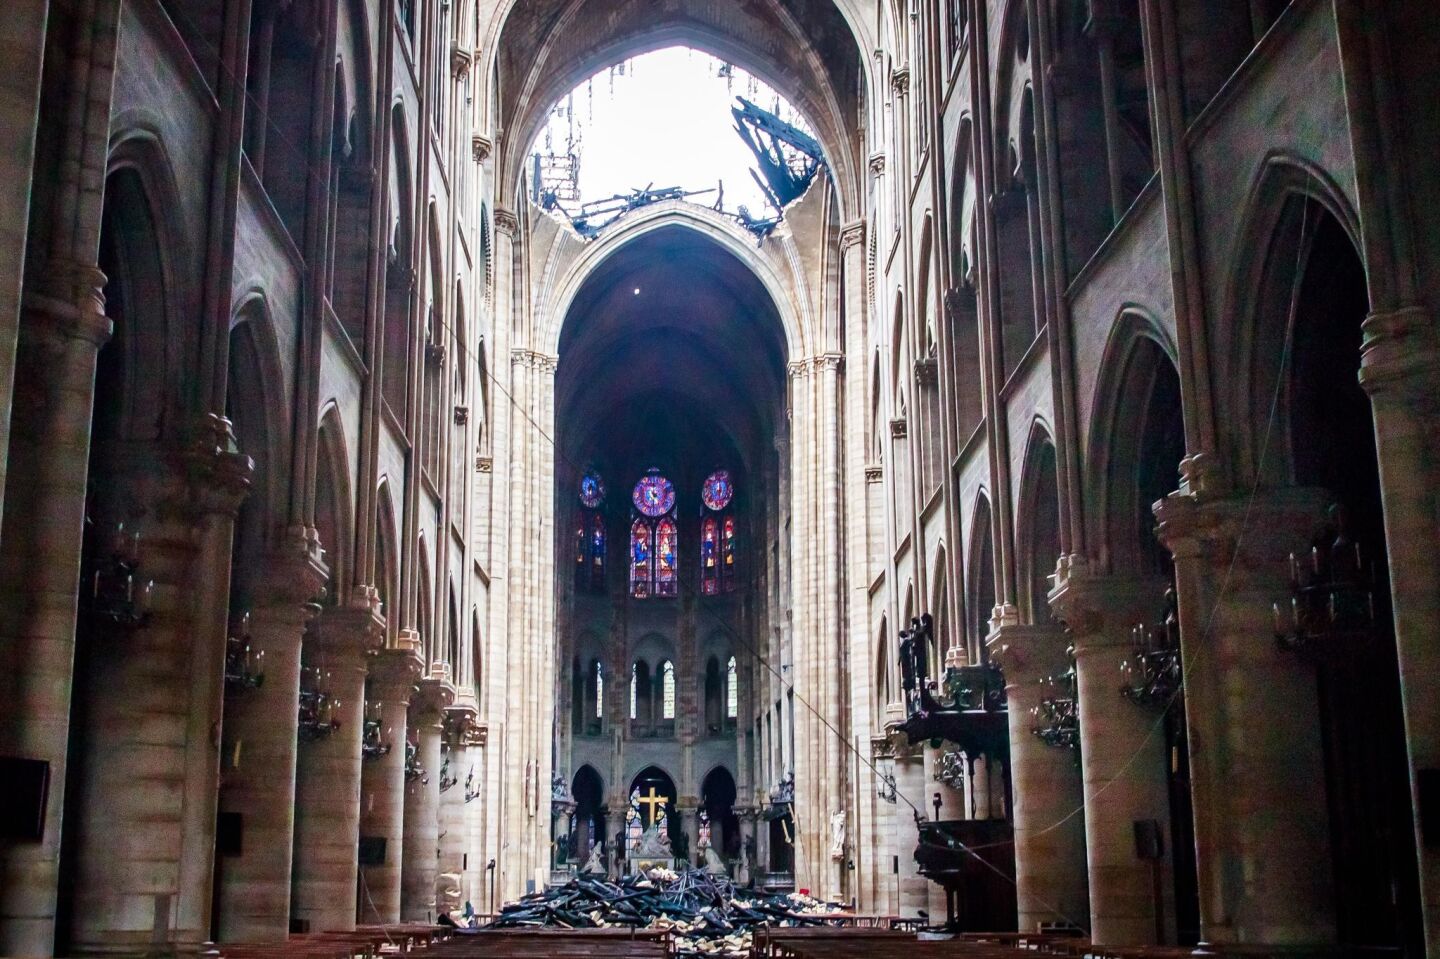 View of damage to Notre Dame Cathedral following a fire that devastated the landmark in Paris. The famed stained-glass windows in the cathedral survived the blaze.